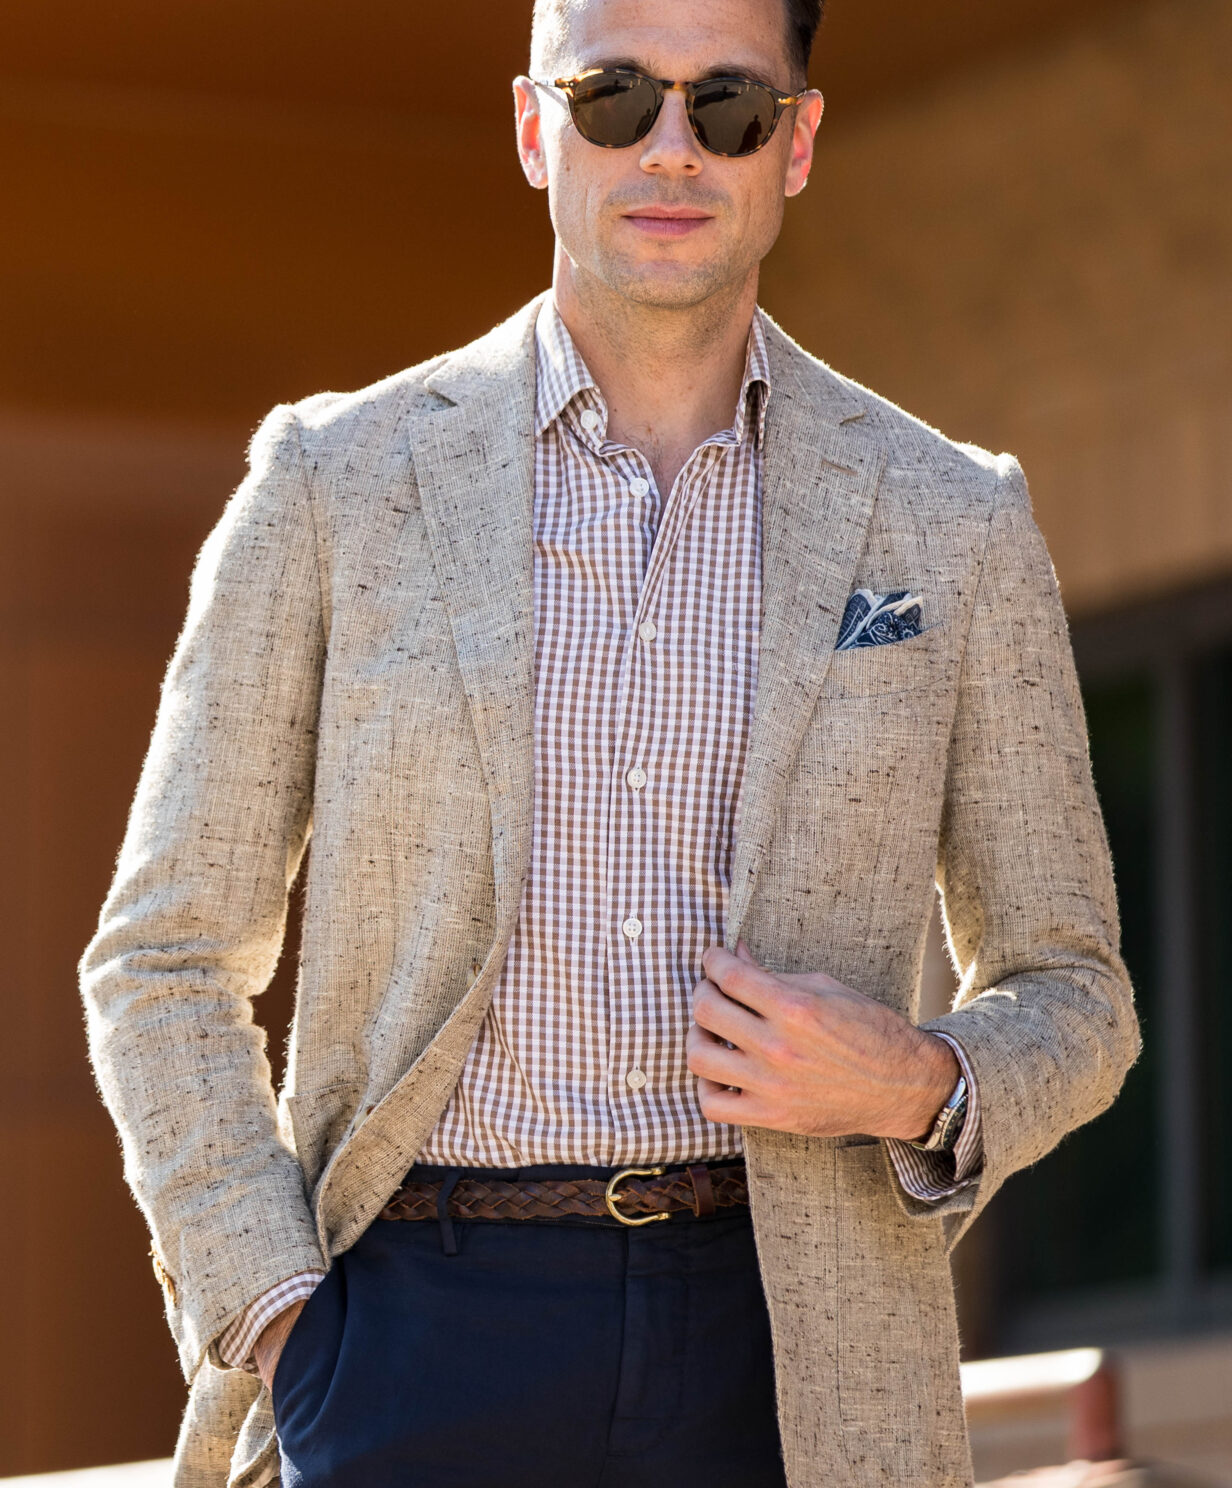 Casually Tailored: Summer Office Attire Done Right